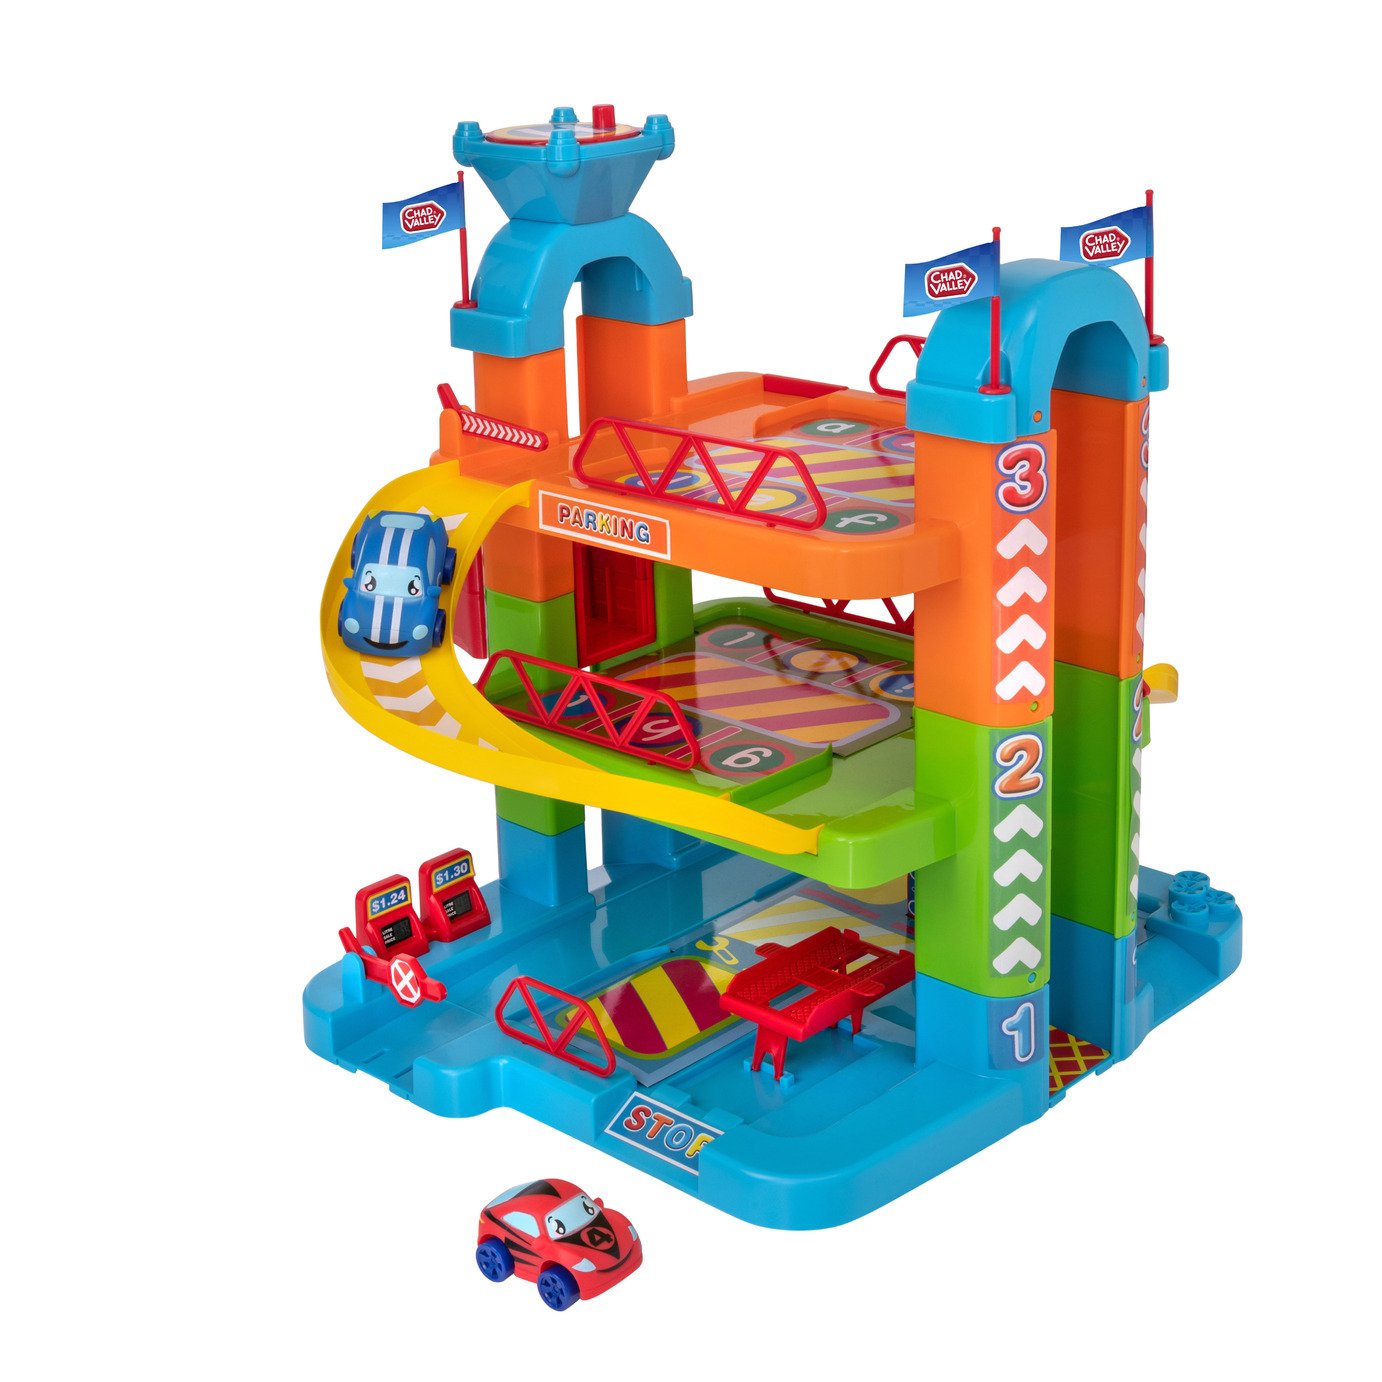 Chad Valley 3 Level Garage with 2 Free-wheeling Cars review